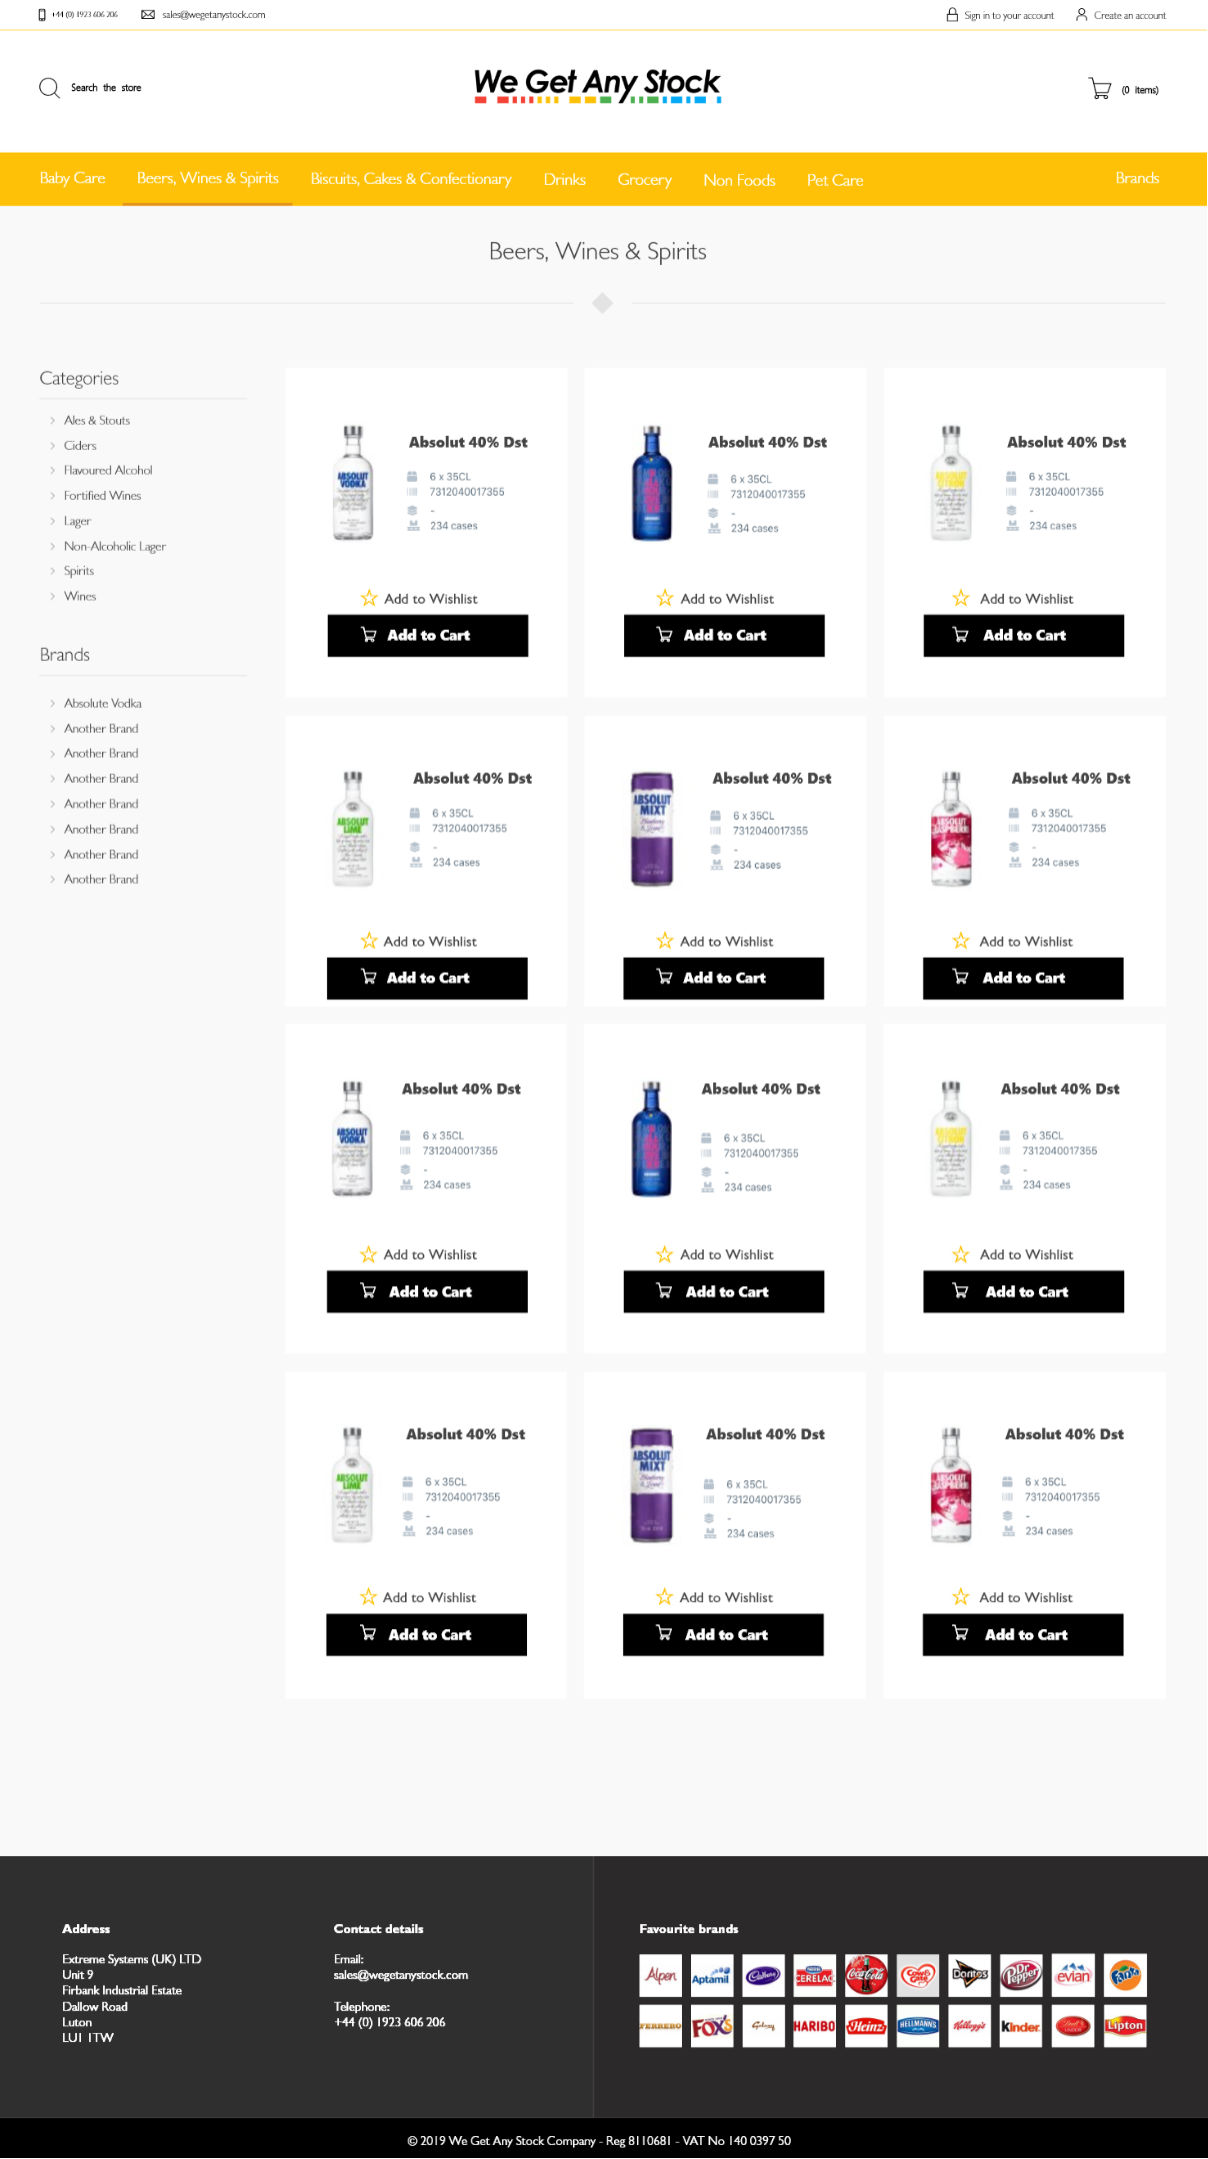 We Get Any Stock product list page full desktop view.